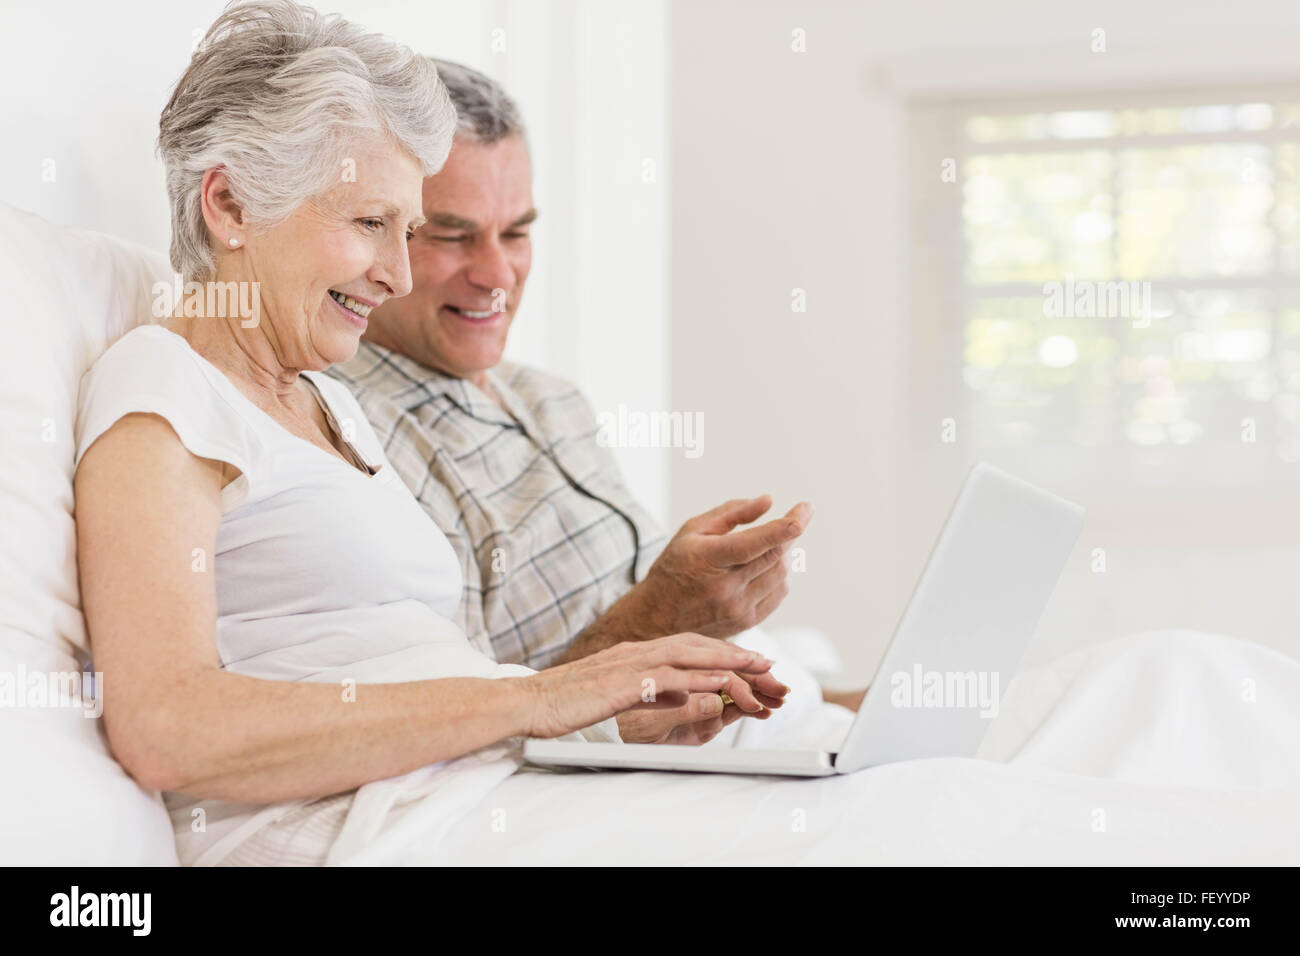 Senior couple using laptop at bed Banque D'Images